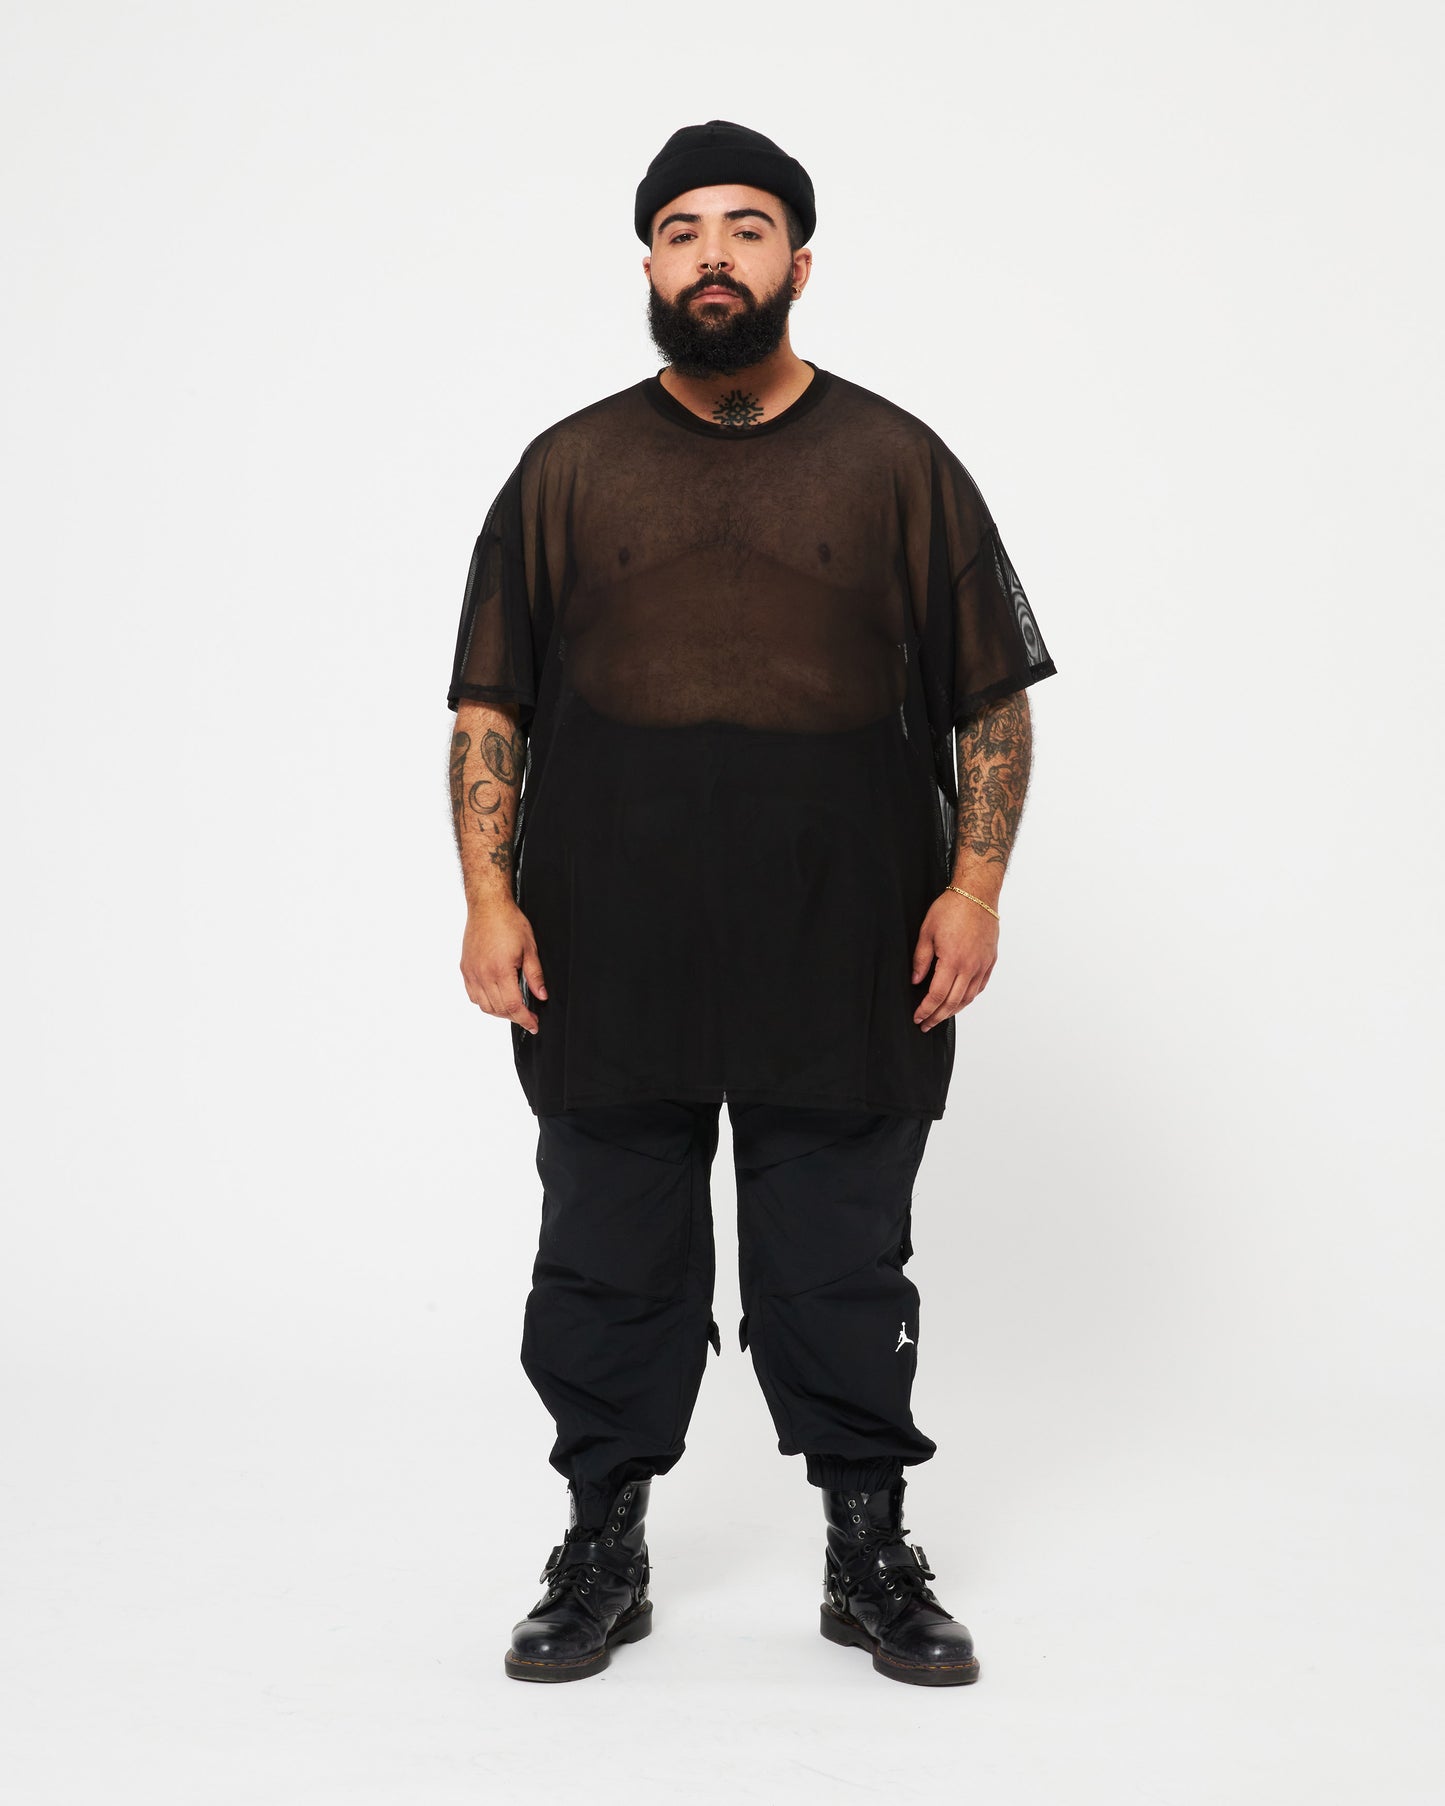 OVERSIZED T-SHIRT / ALL YOU CAN EAT / MESH BLACK